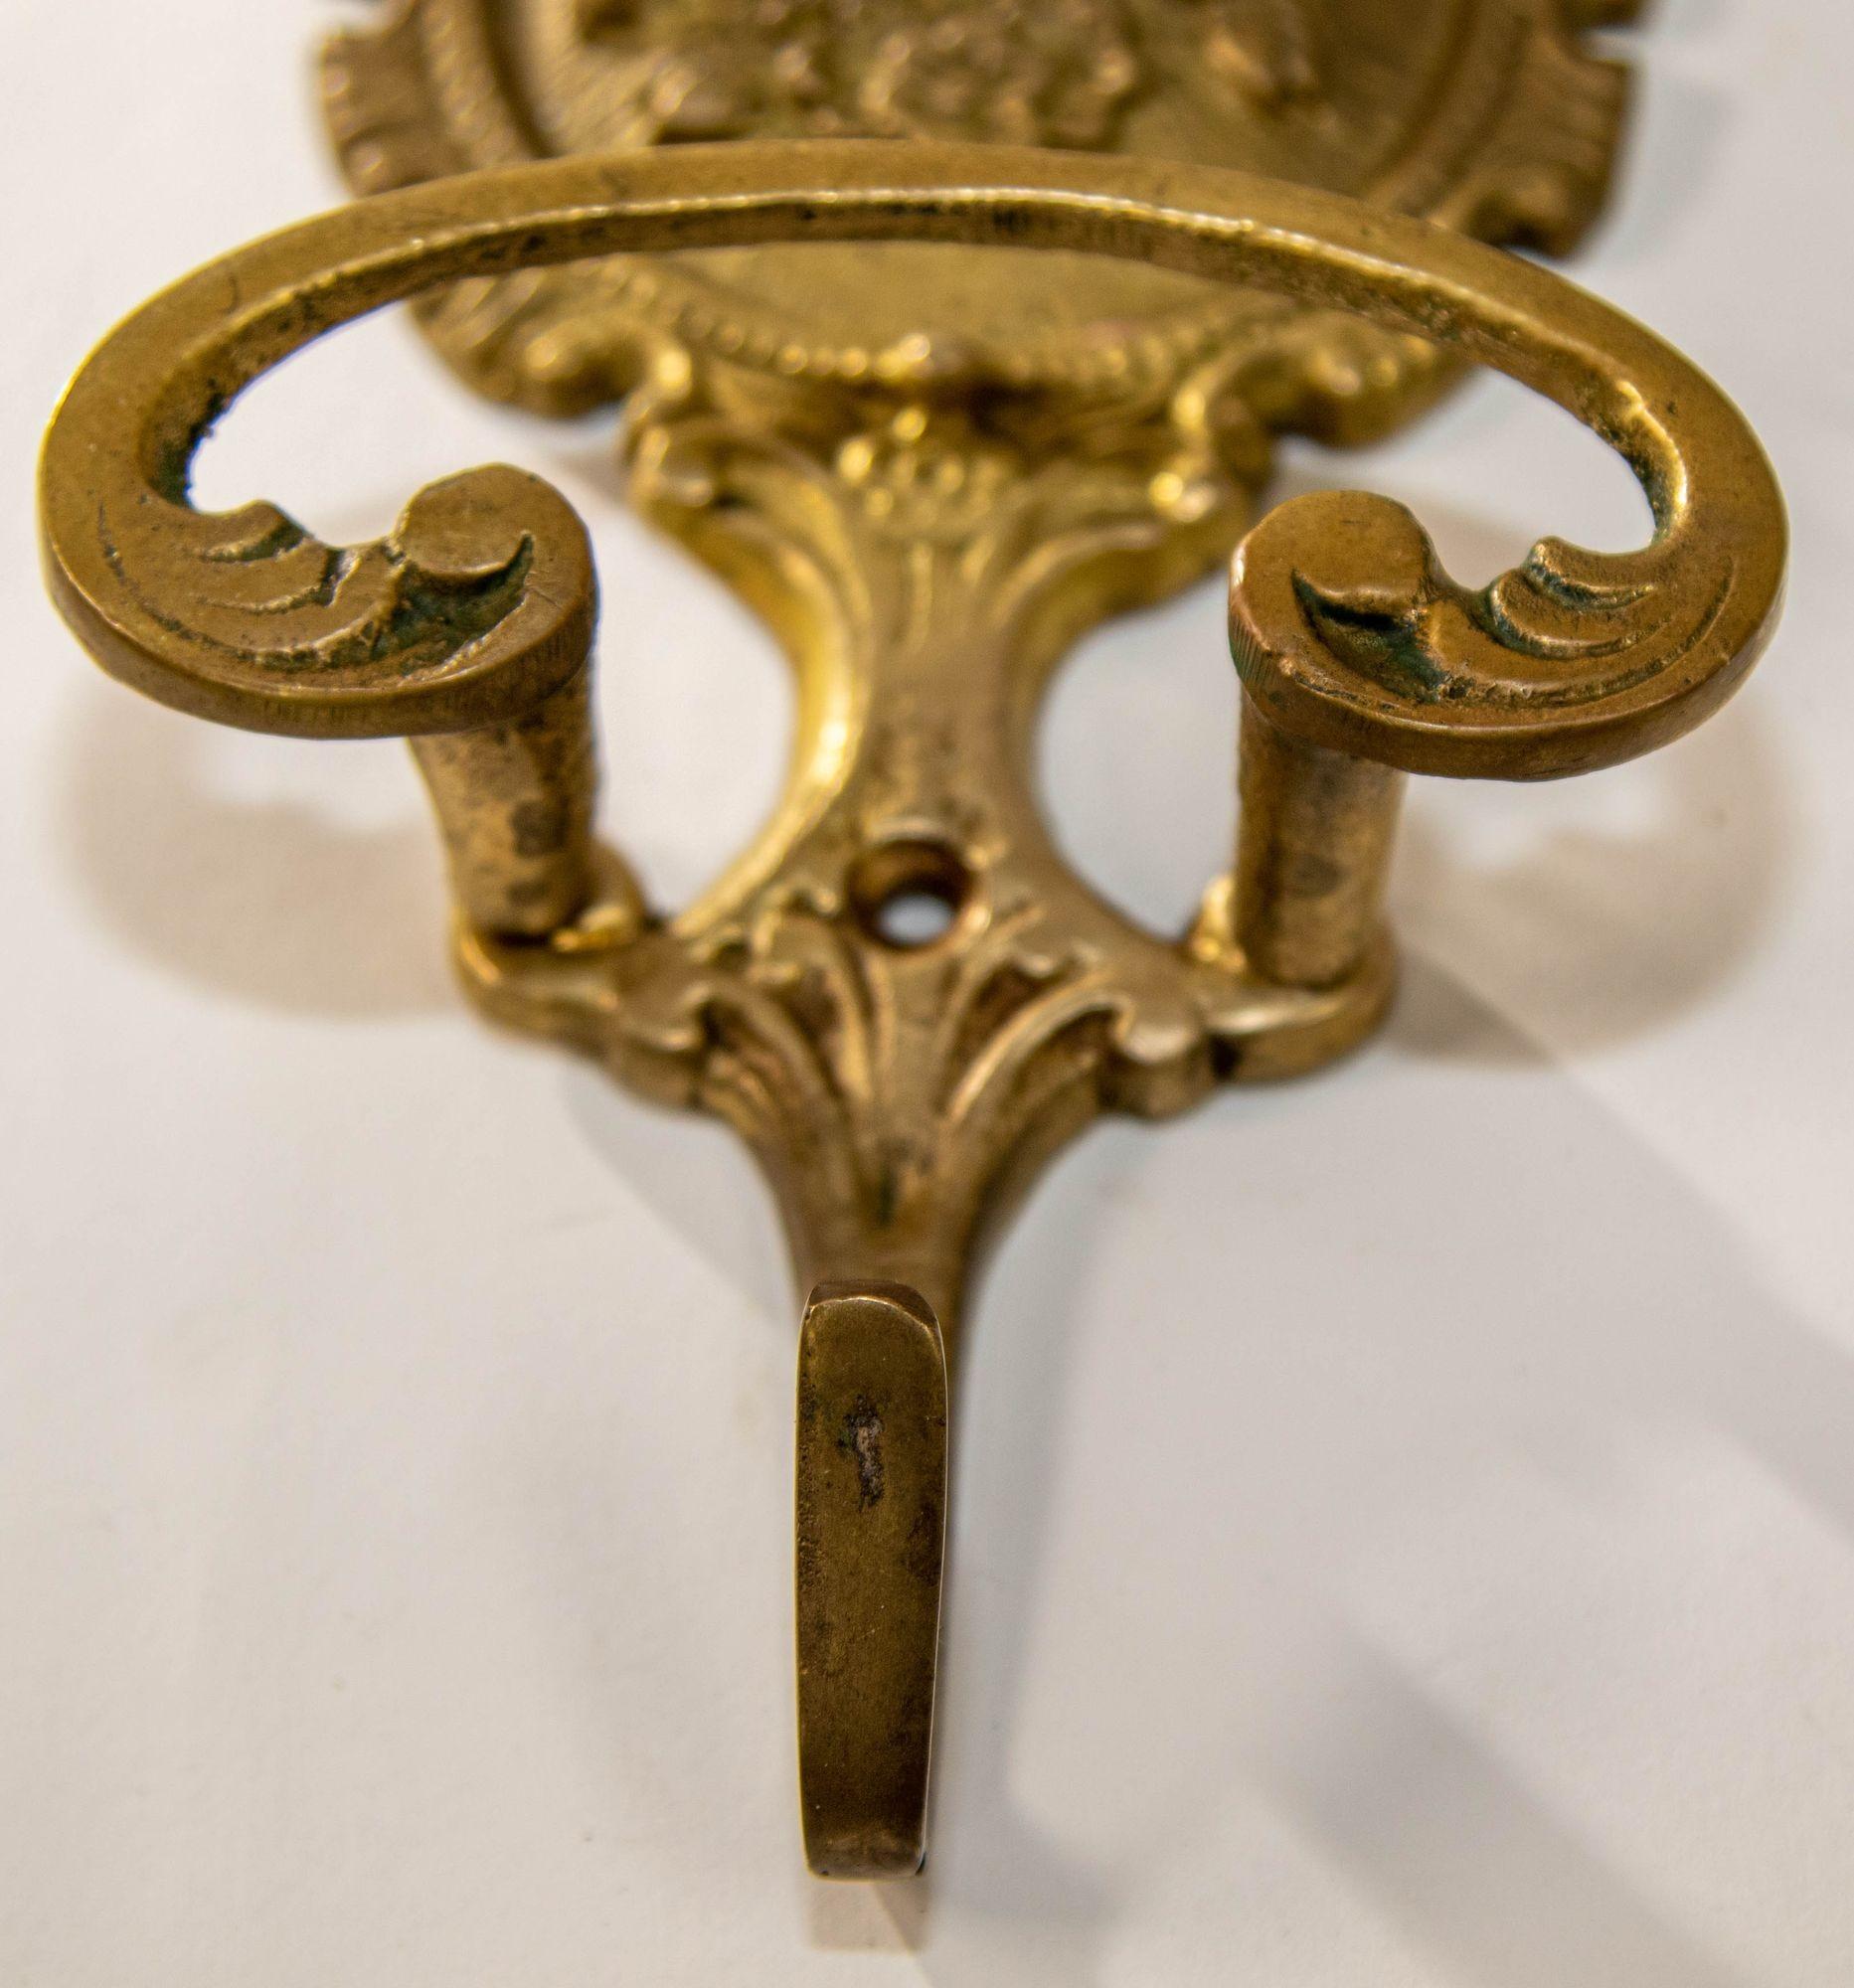 Architectural Italian Cast Brass Floral Wall Hook Decor Made in Italy 4